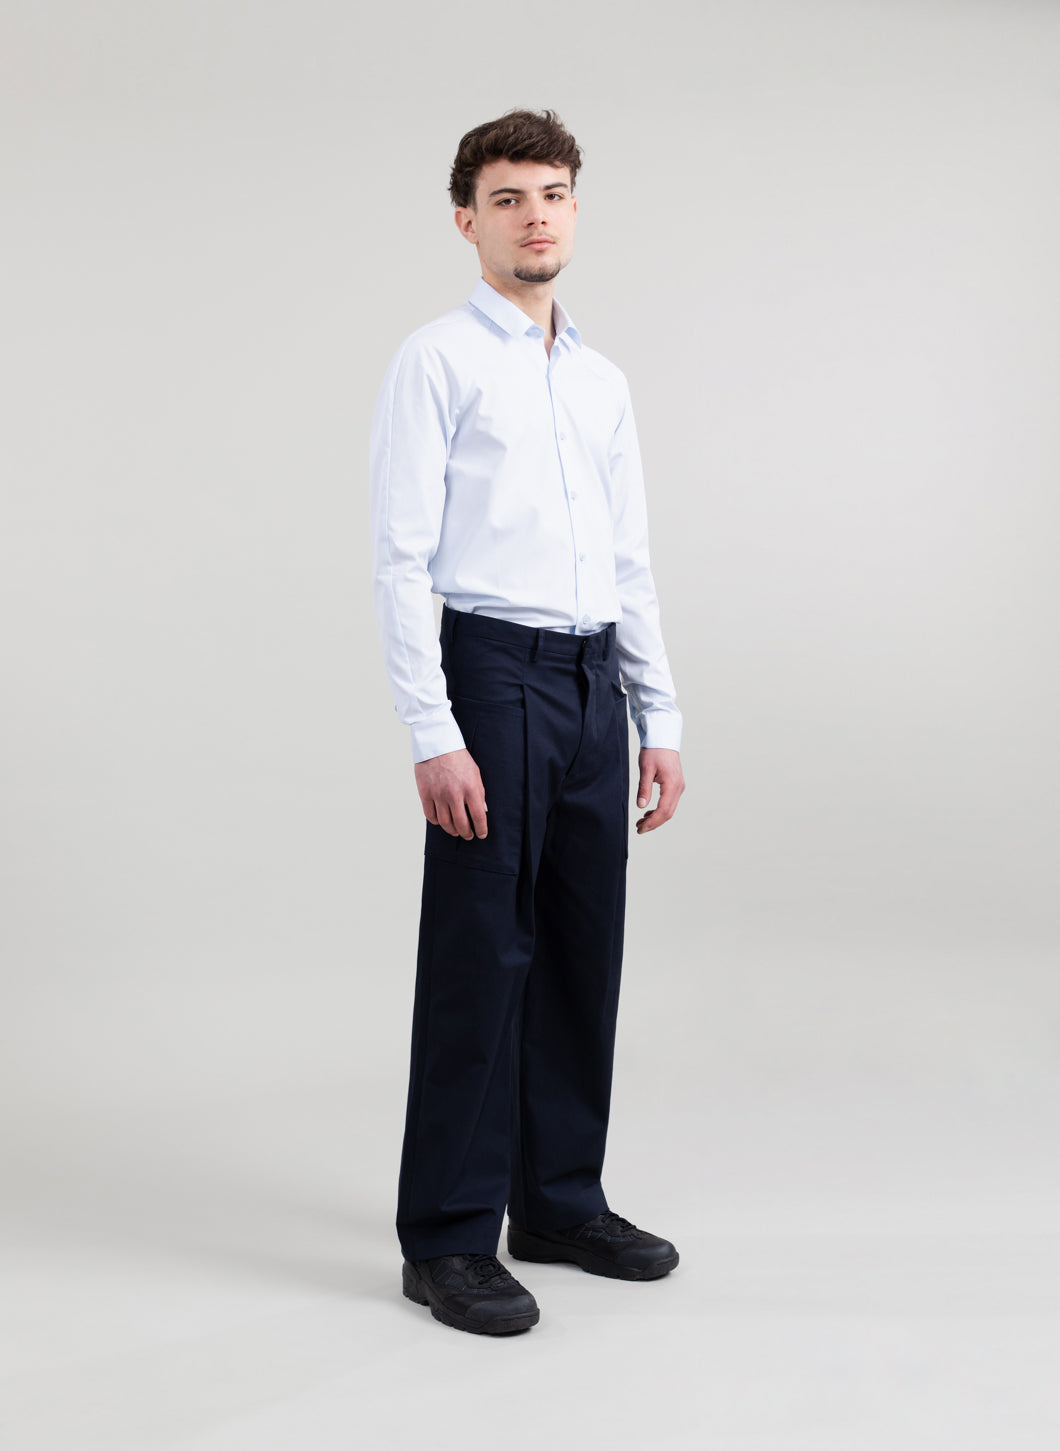 Workwear Pants in Navy Blue Cotton Twill